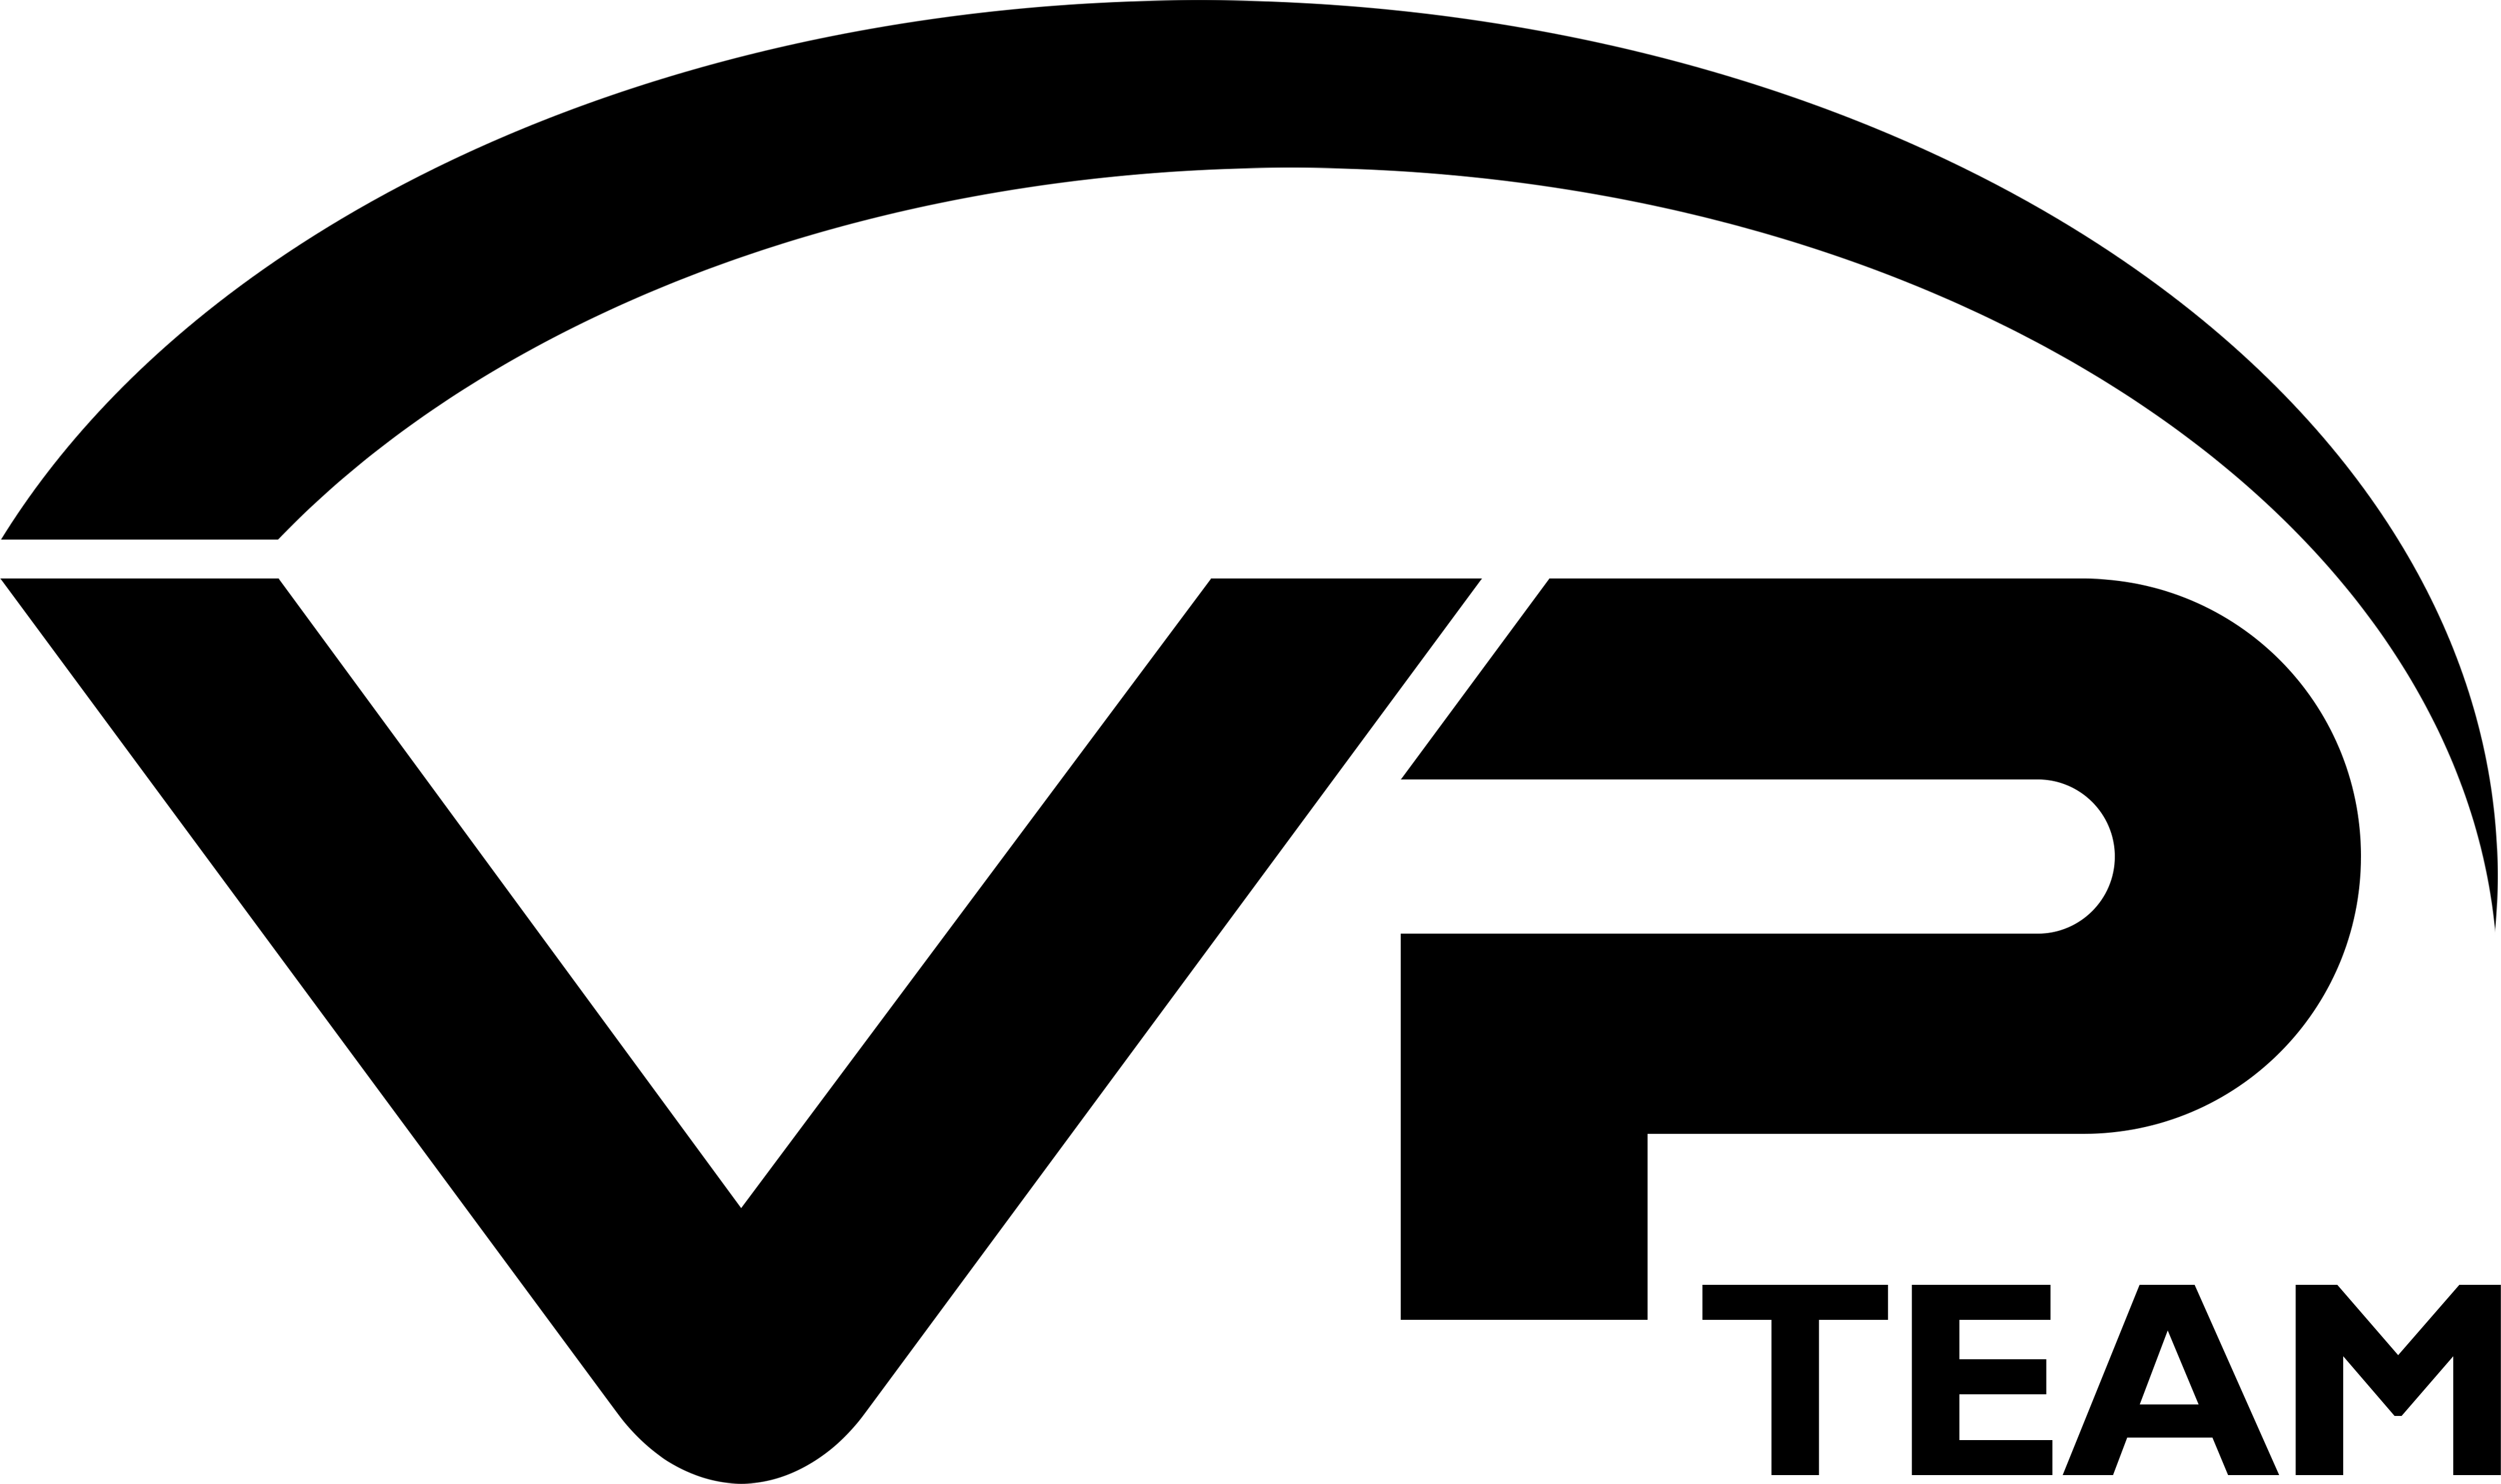 VisualProductTeam